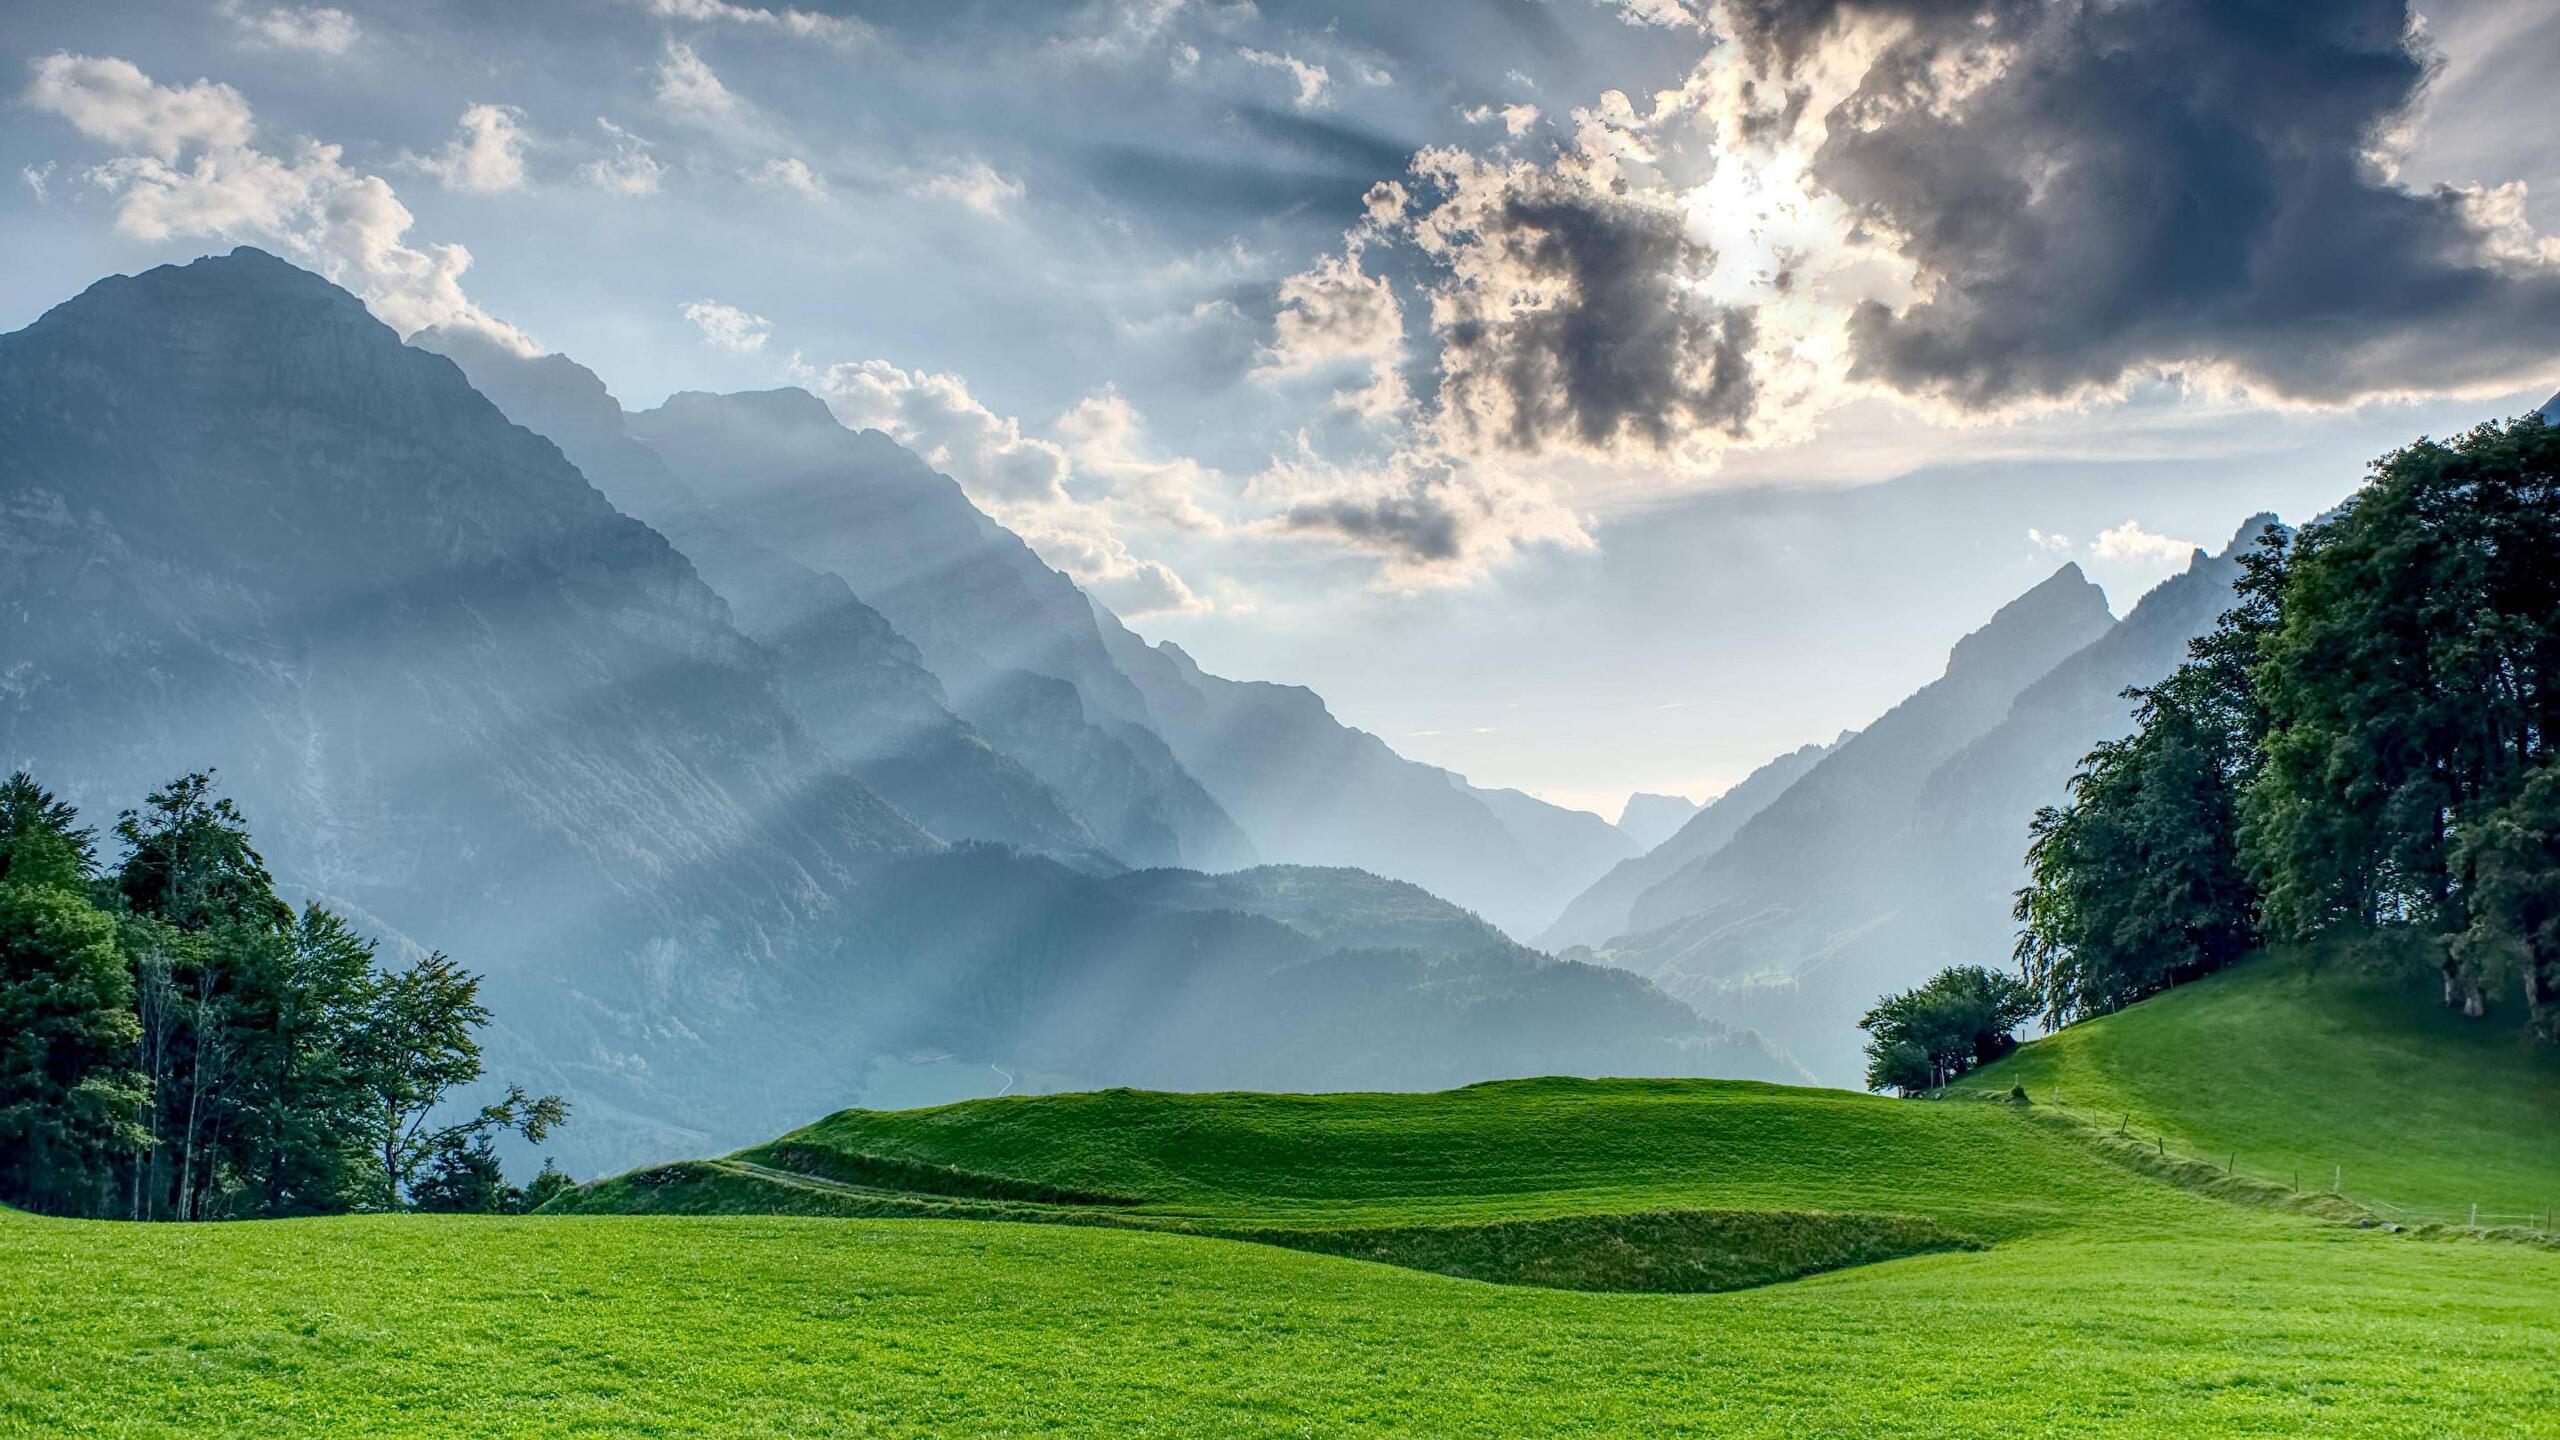 Switzerland 4K wallpaper for your desktop or mobile screen free and easy to download